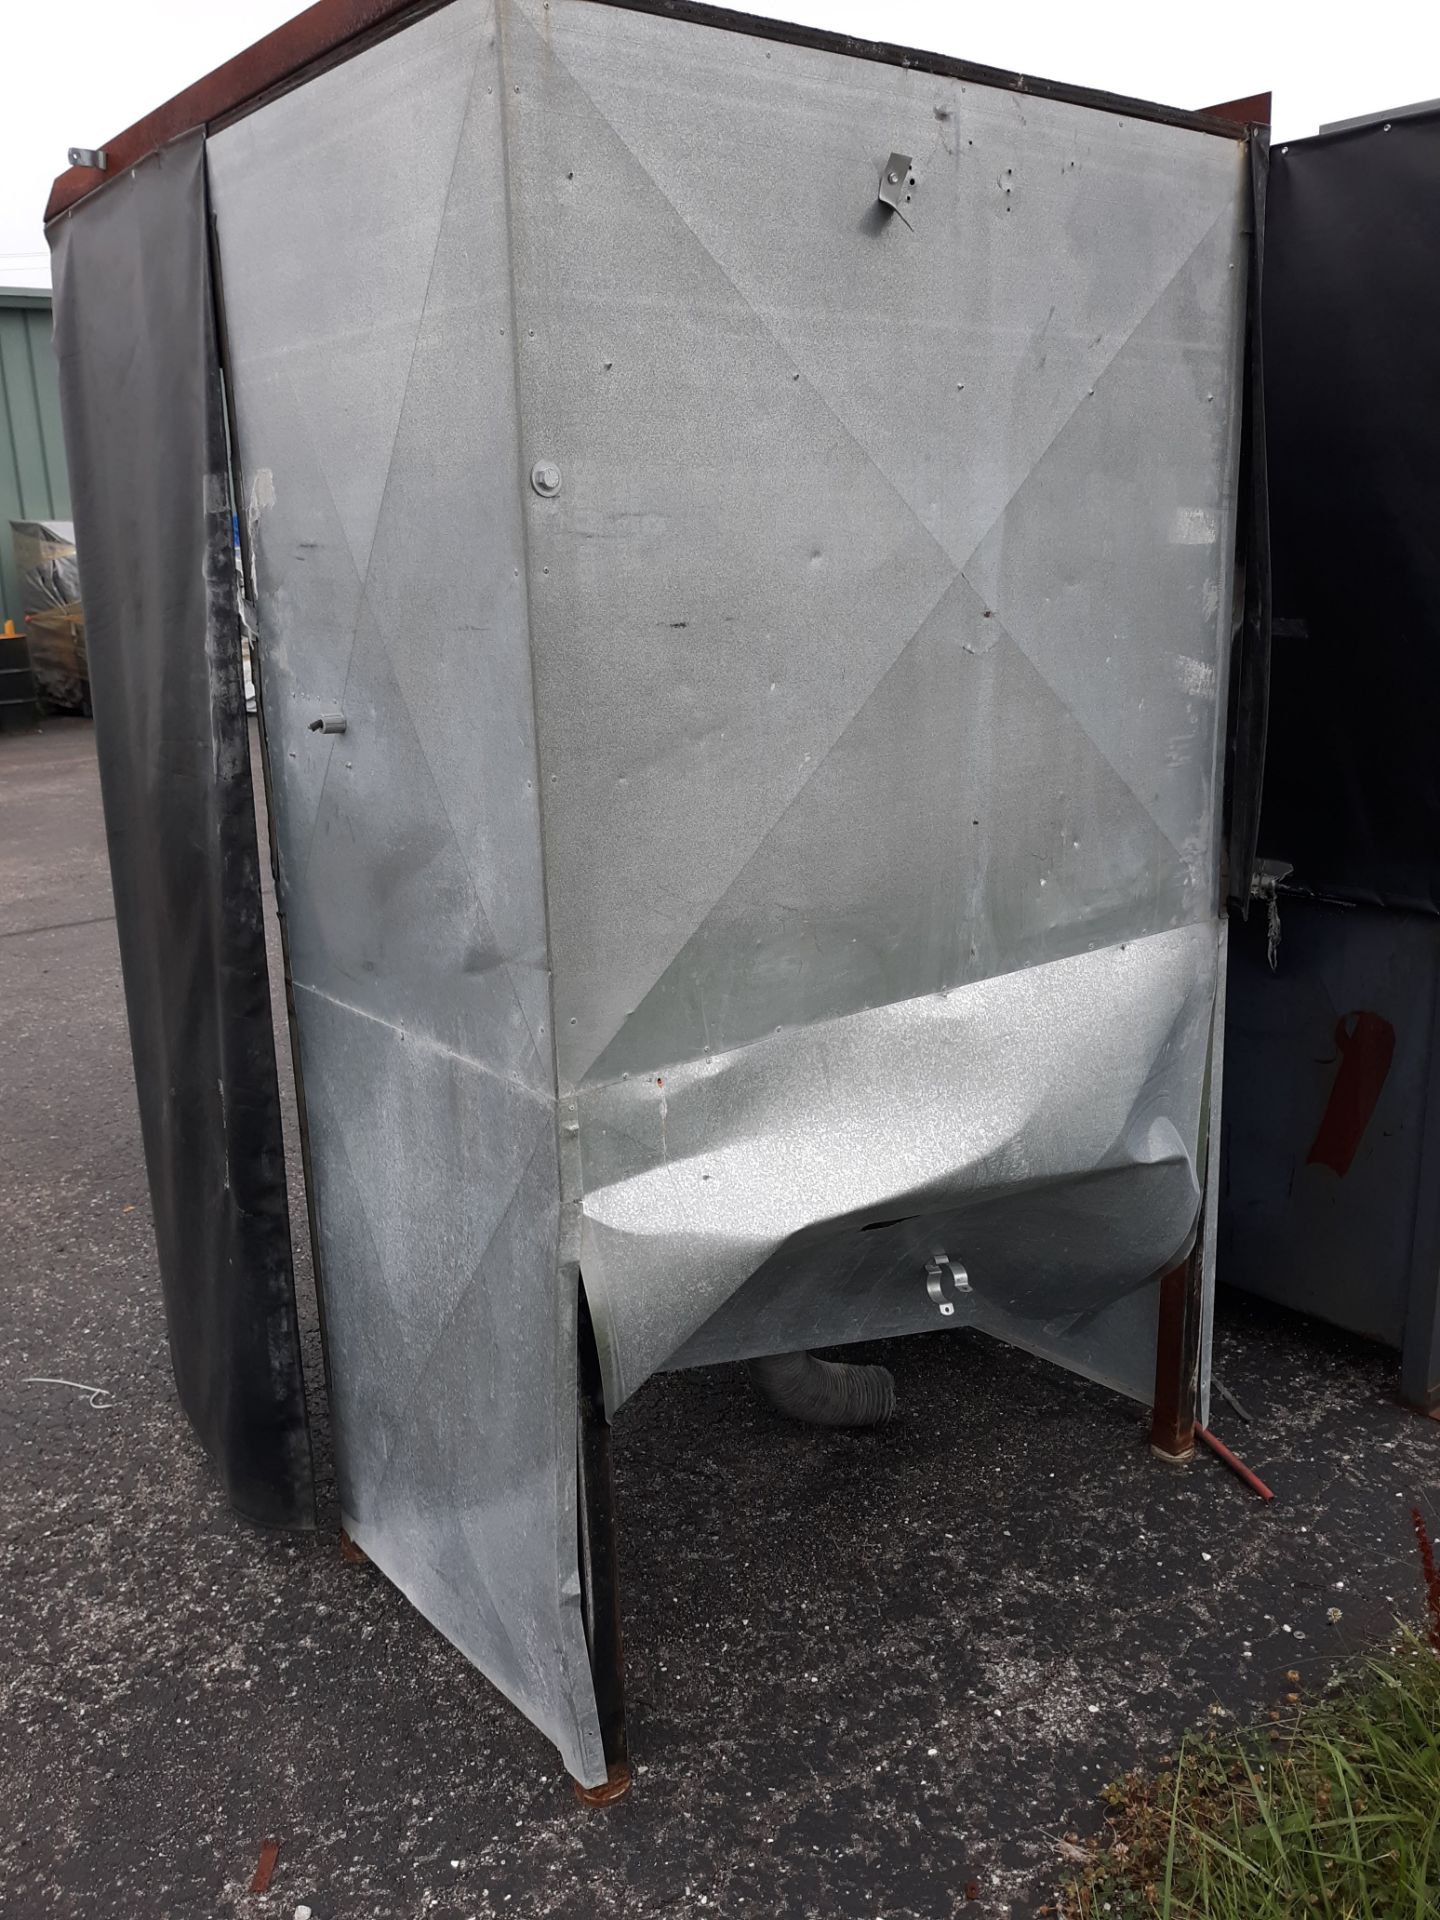 GALVANIZED METAL BOOTH W/ CURTAINS APPROX. 4' WIDE X 4½ DEEP X 7' TALL HAS LIGHTING FIXTURES; - Image 2 of 5